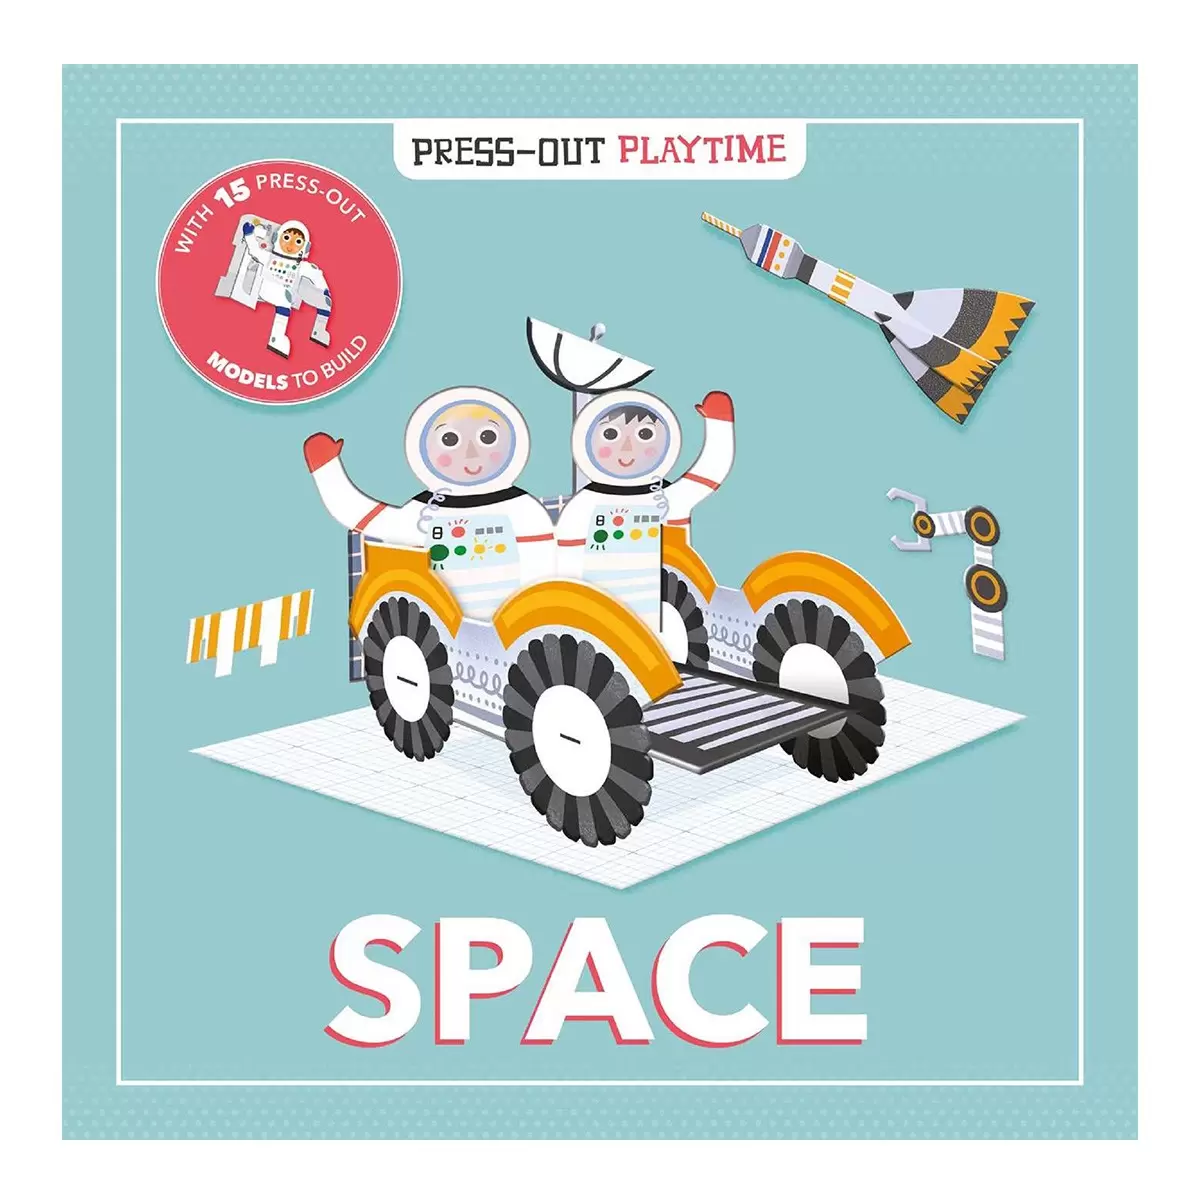 Press-Out Playtime Book 外文遊戲書 Space